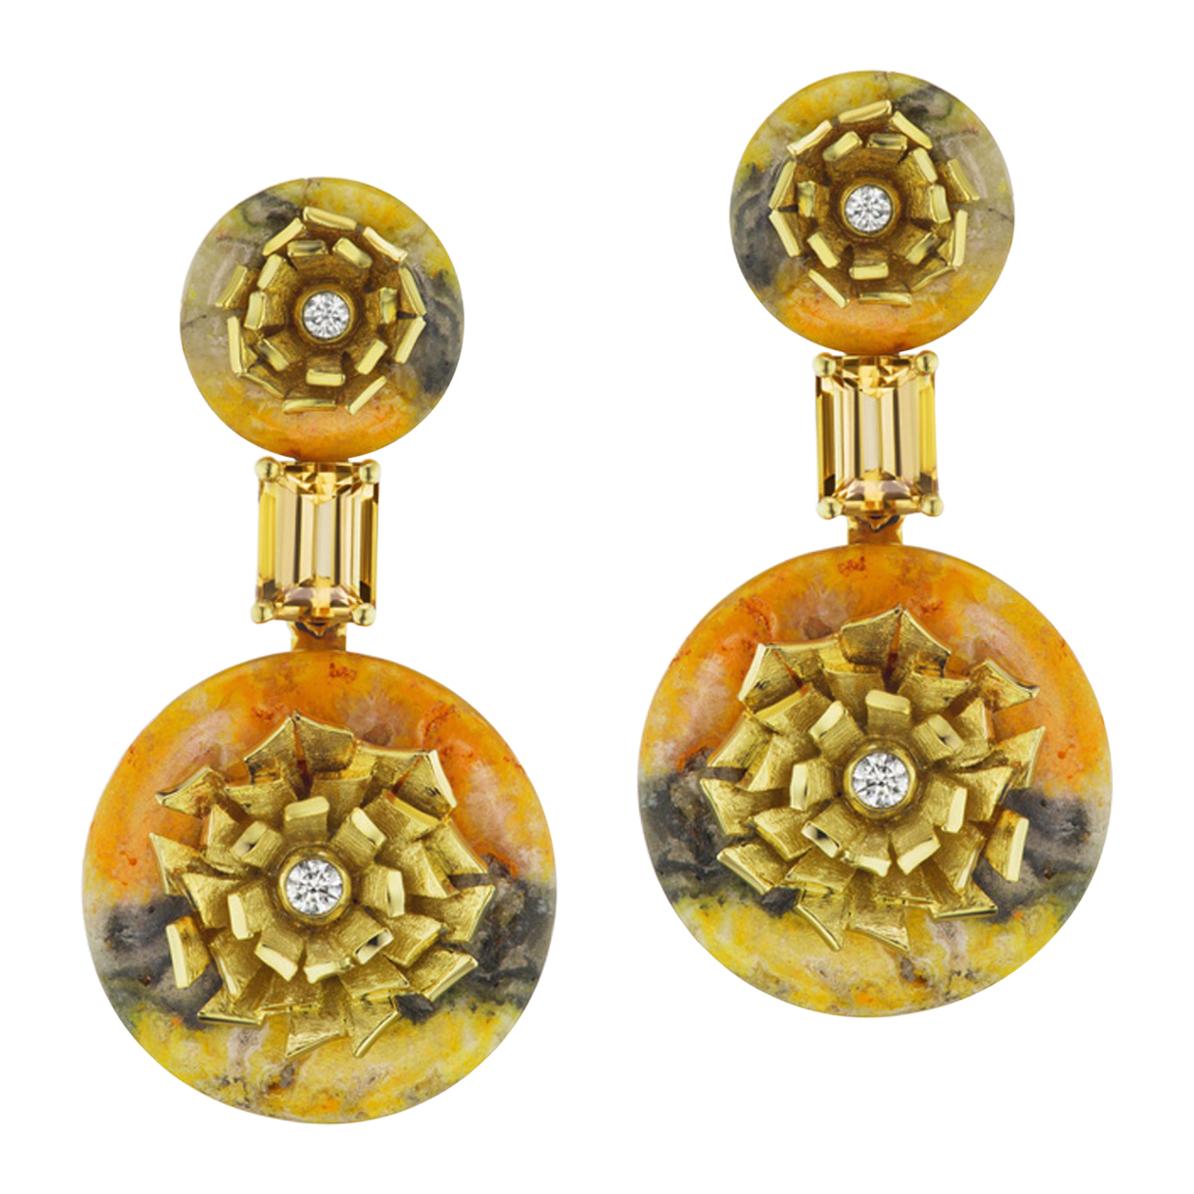 Bumble Bee Jasper and Imperial Topaz “Donut” Series Earrings by Andrew Glassford For Sale